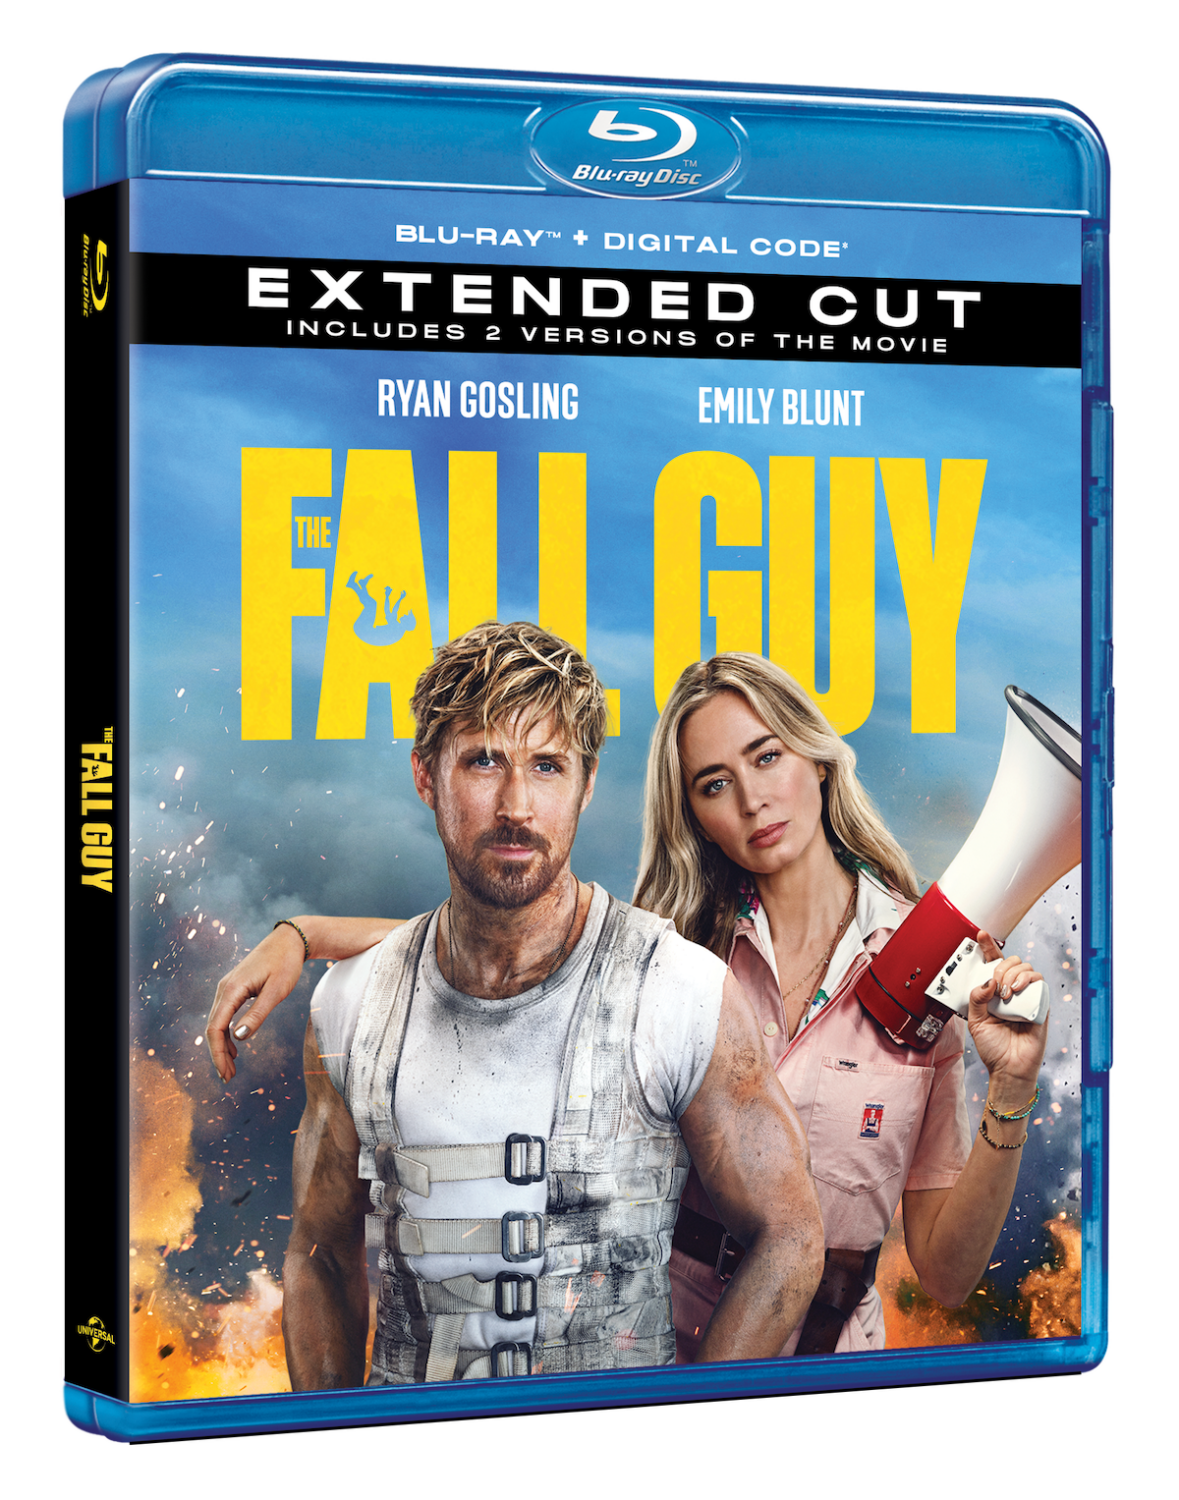 The Fall Guy Blu-ray cover